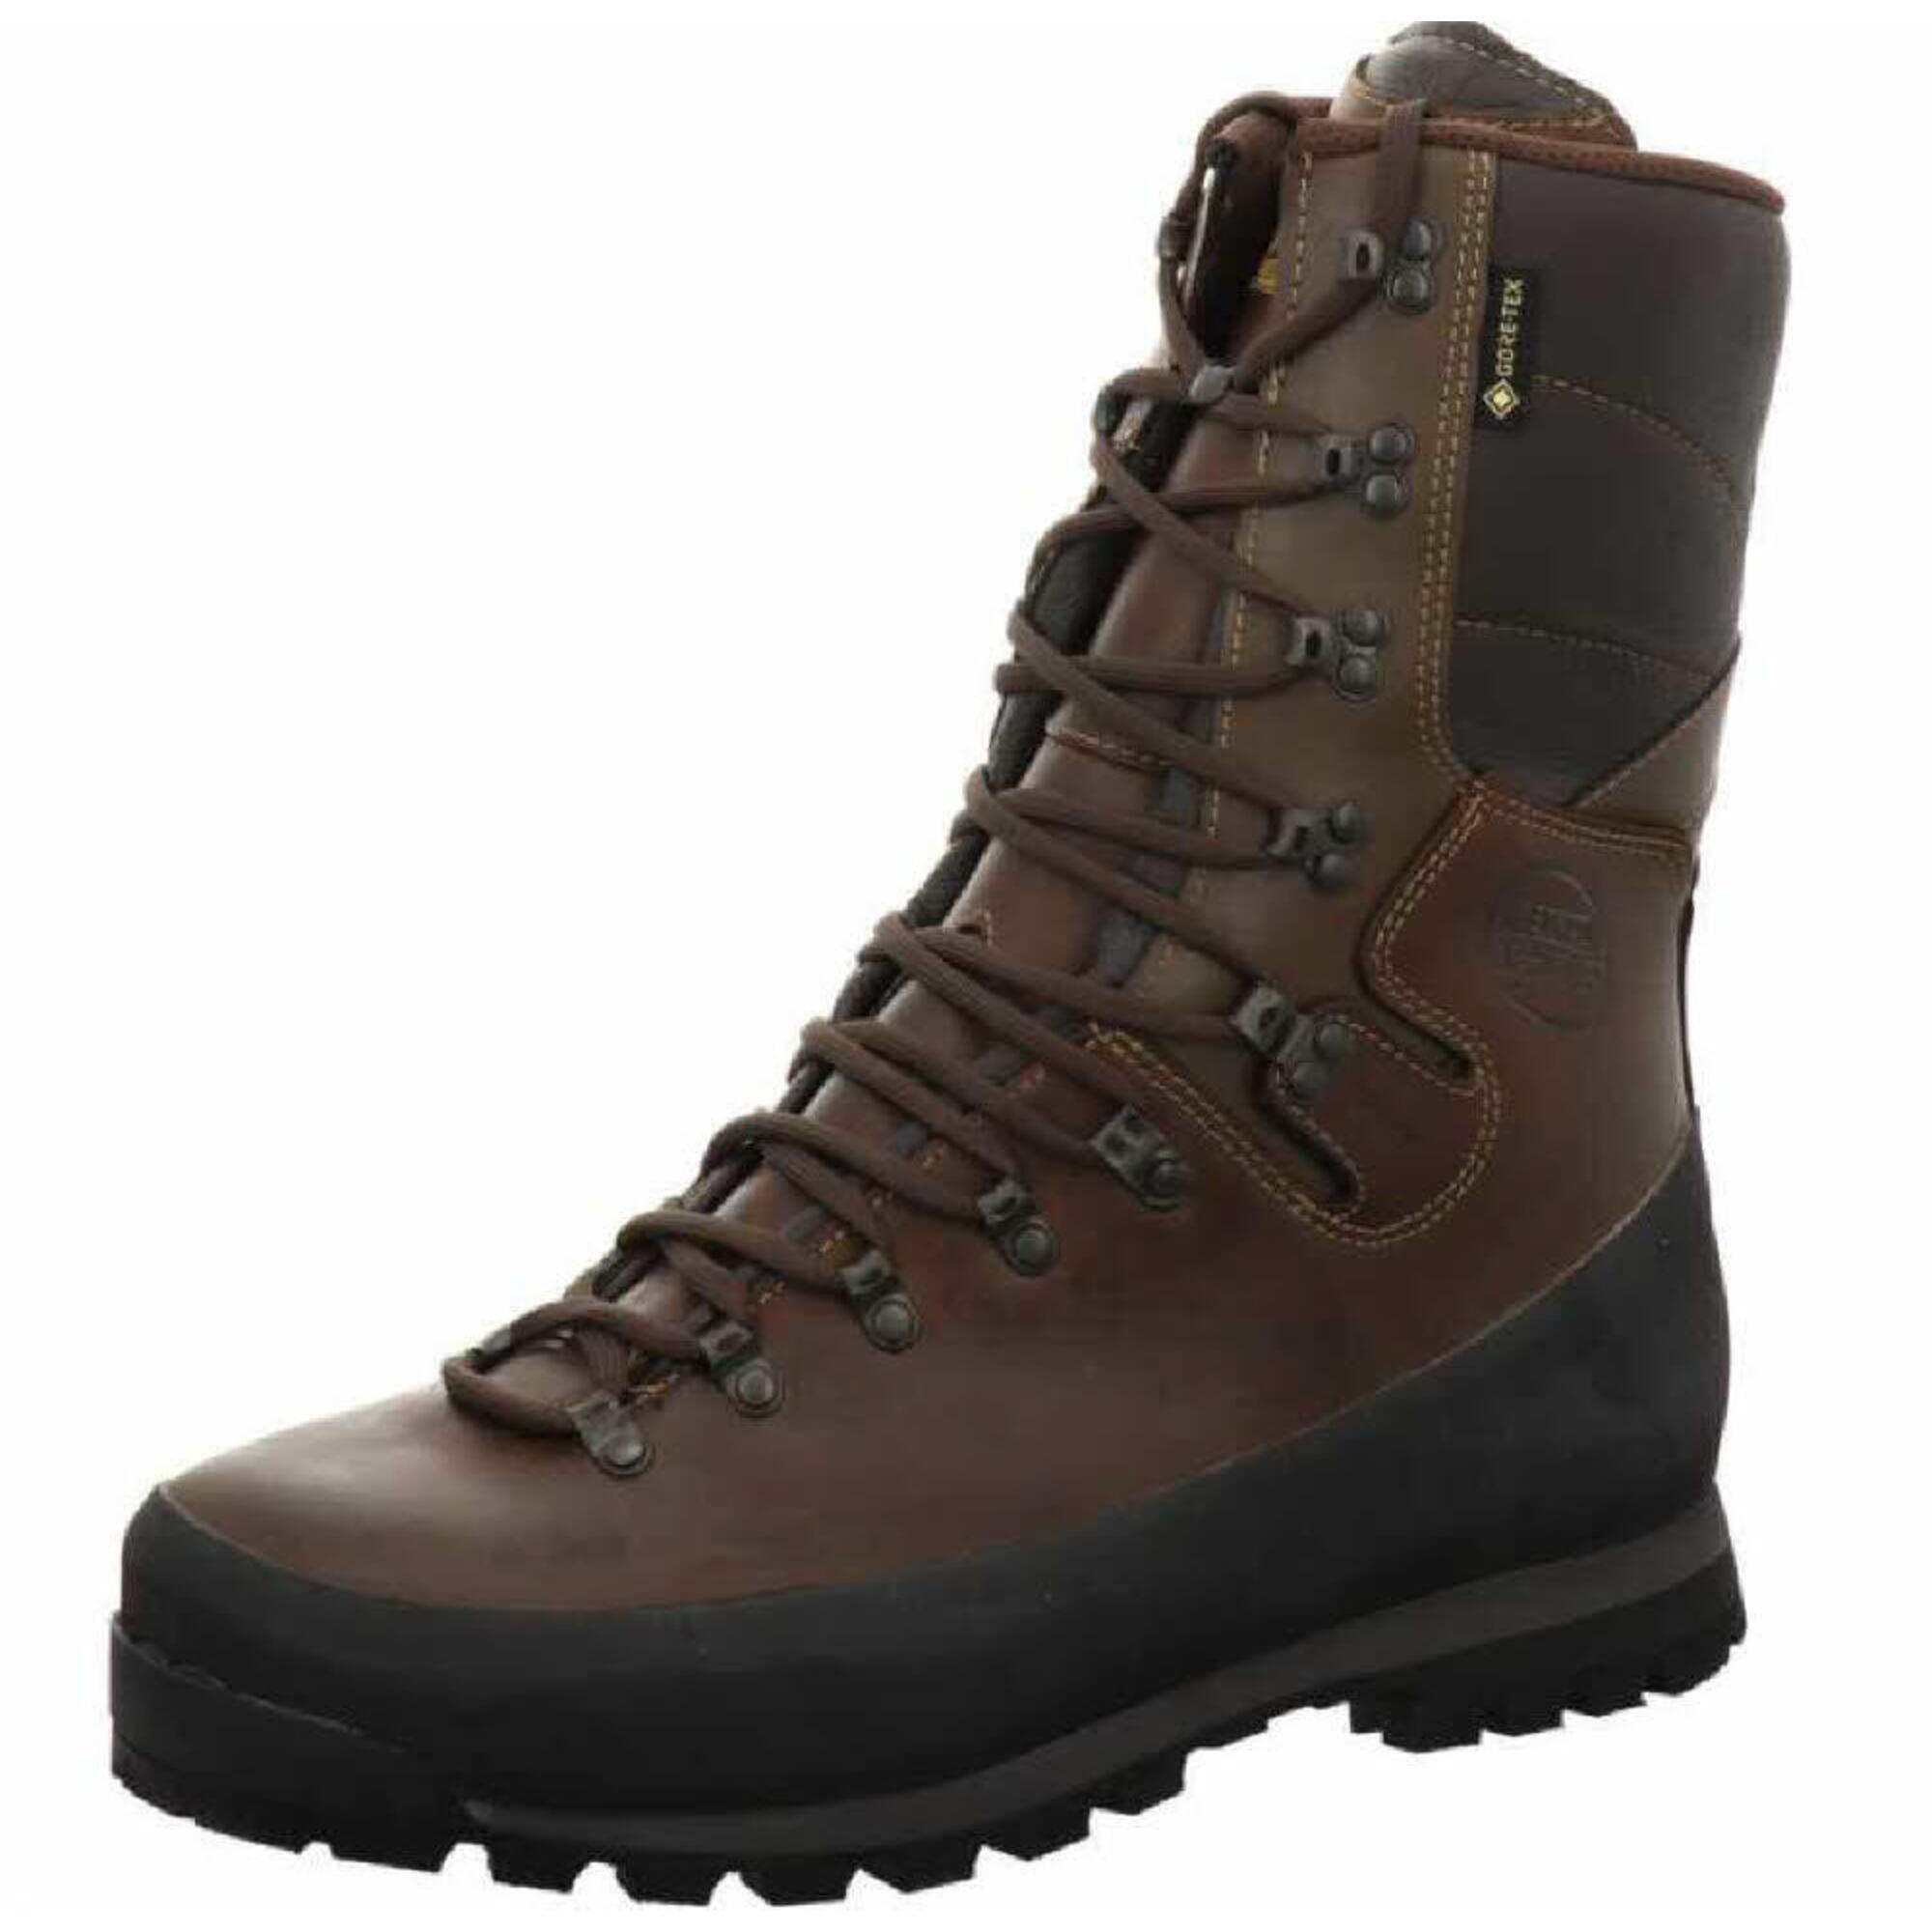 Meindl Dovre Extreme GTX - Wide Field Boots UK 9.5 1/6